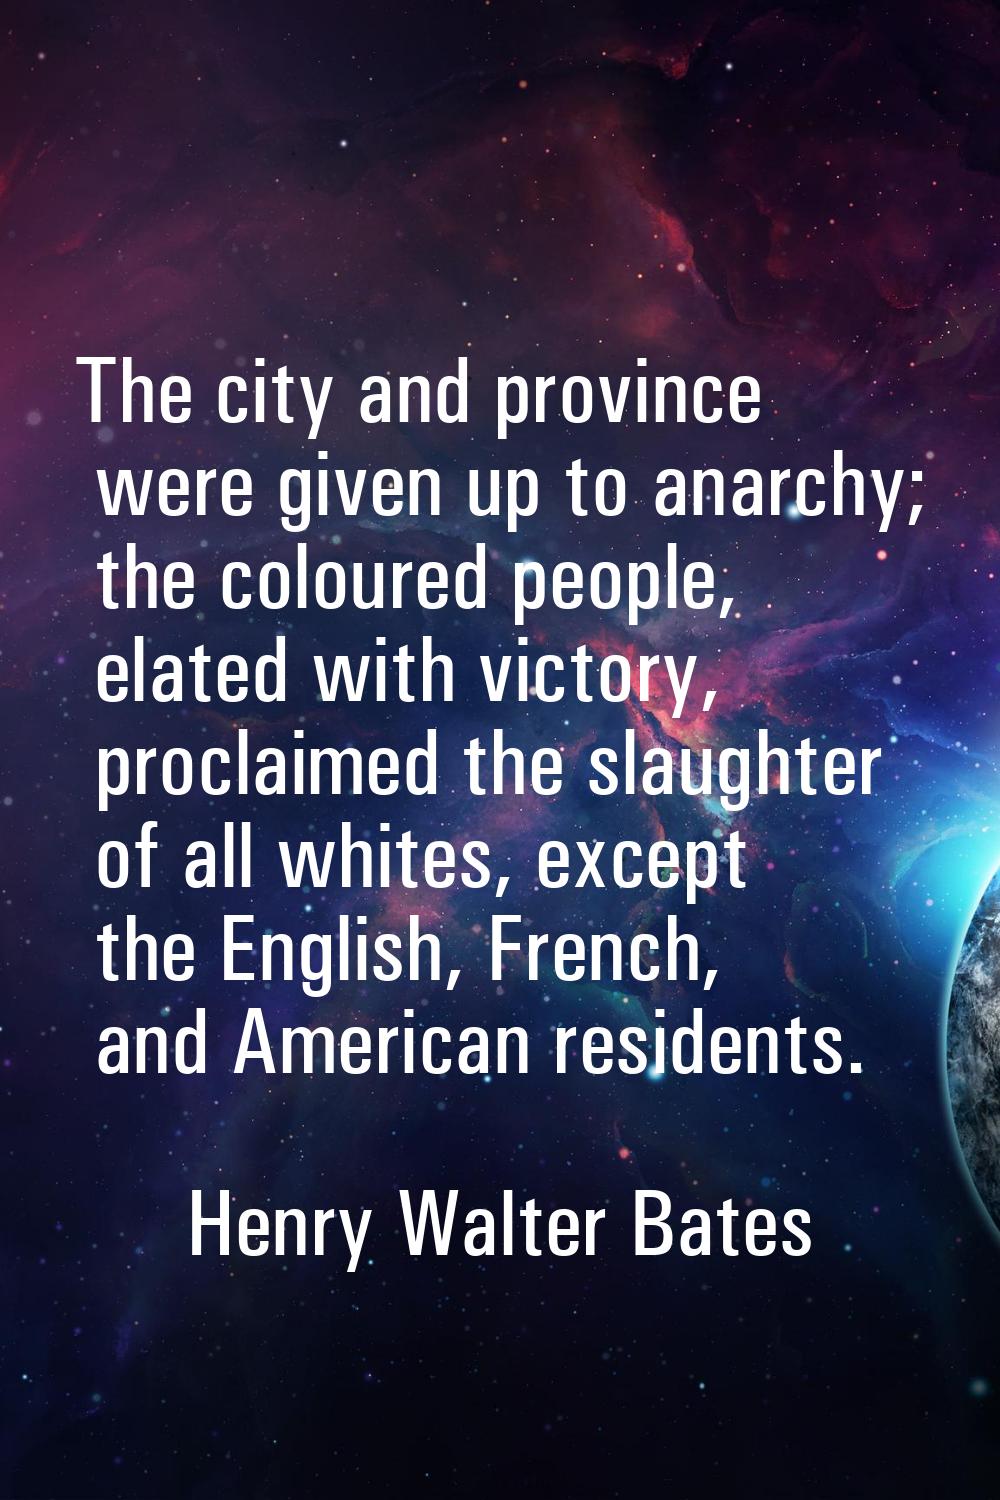 The city and province were given up to anarchy; the coloured people, elated with victory, proclaime